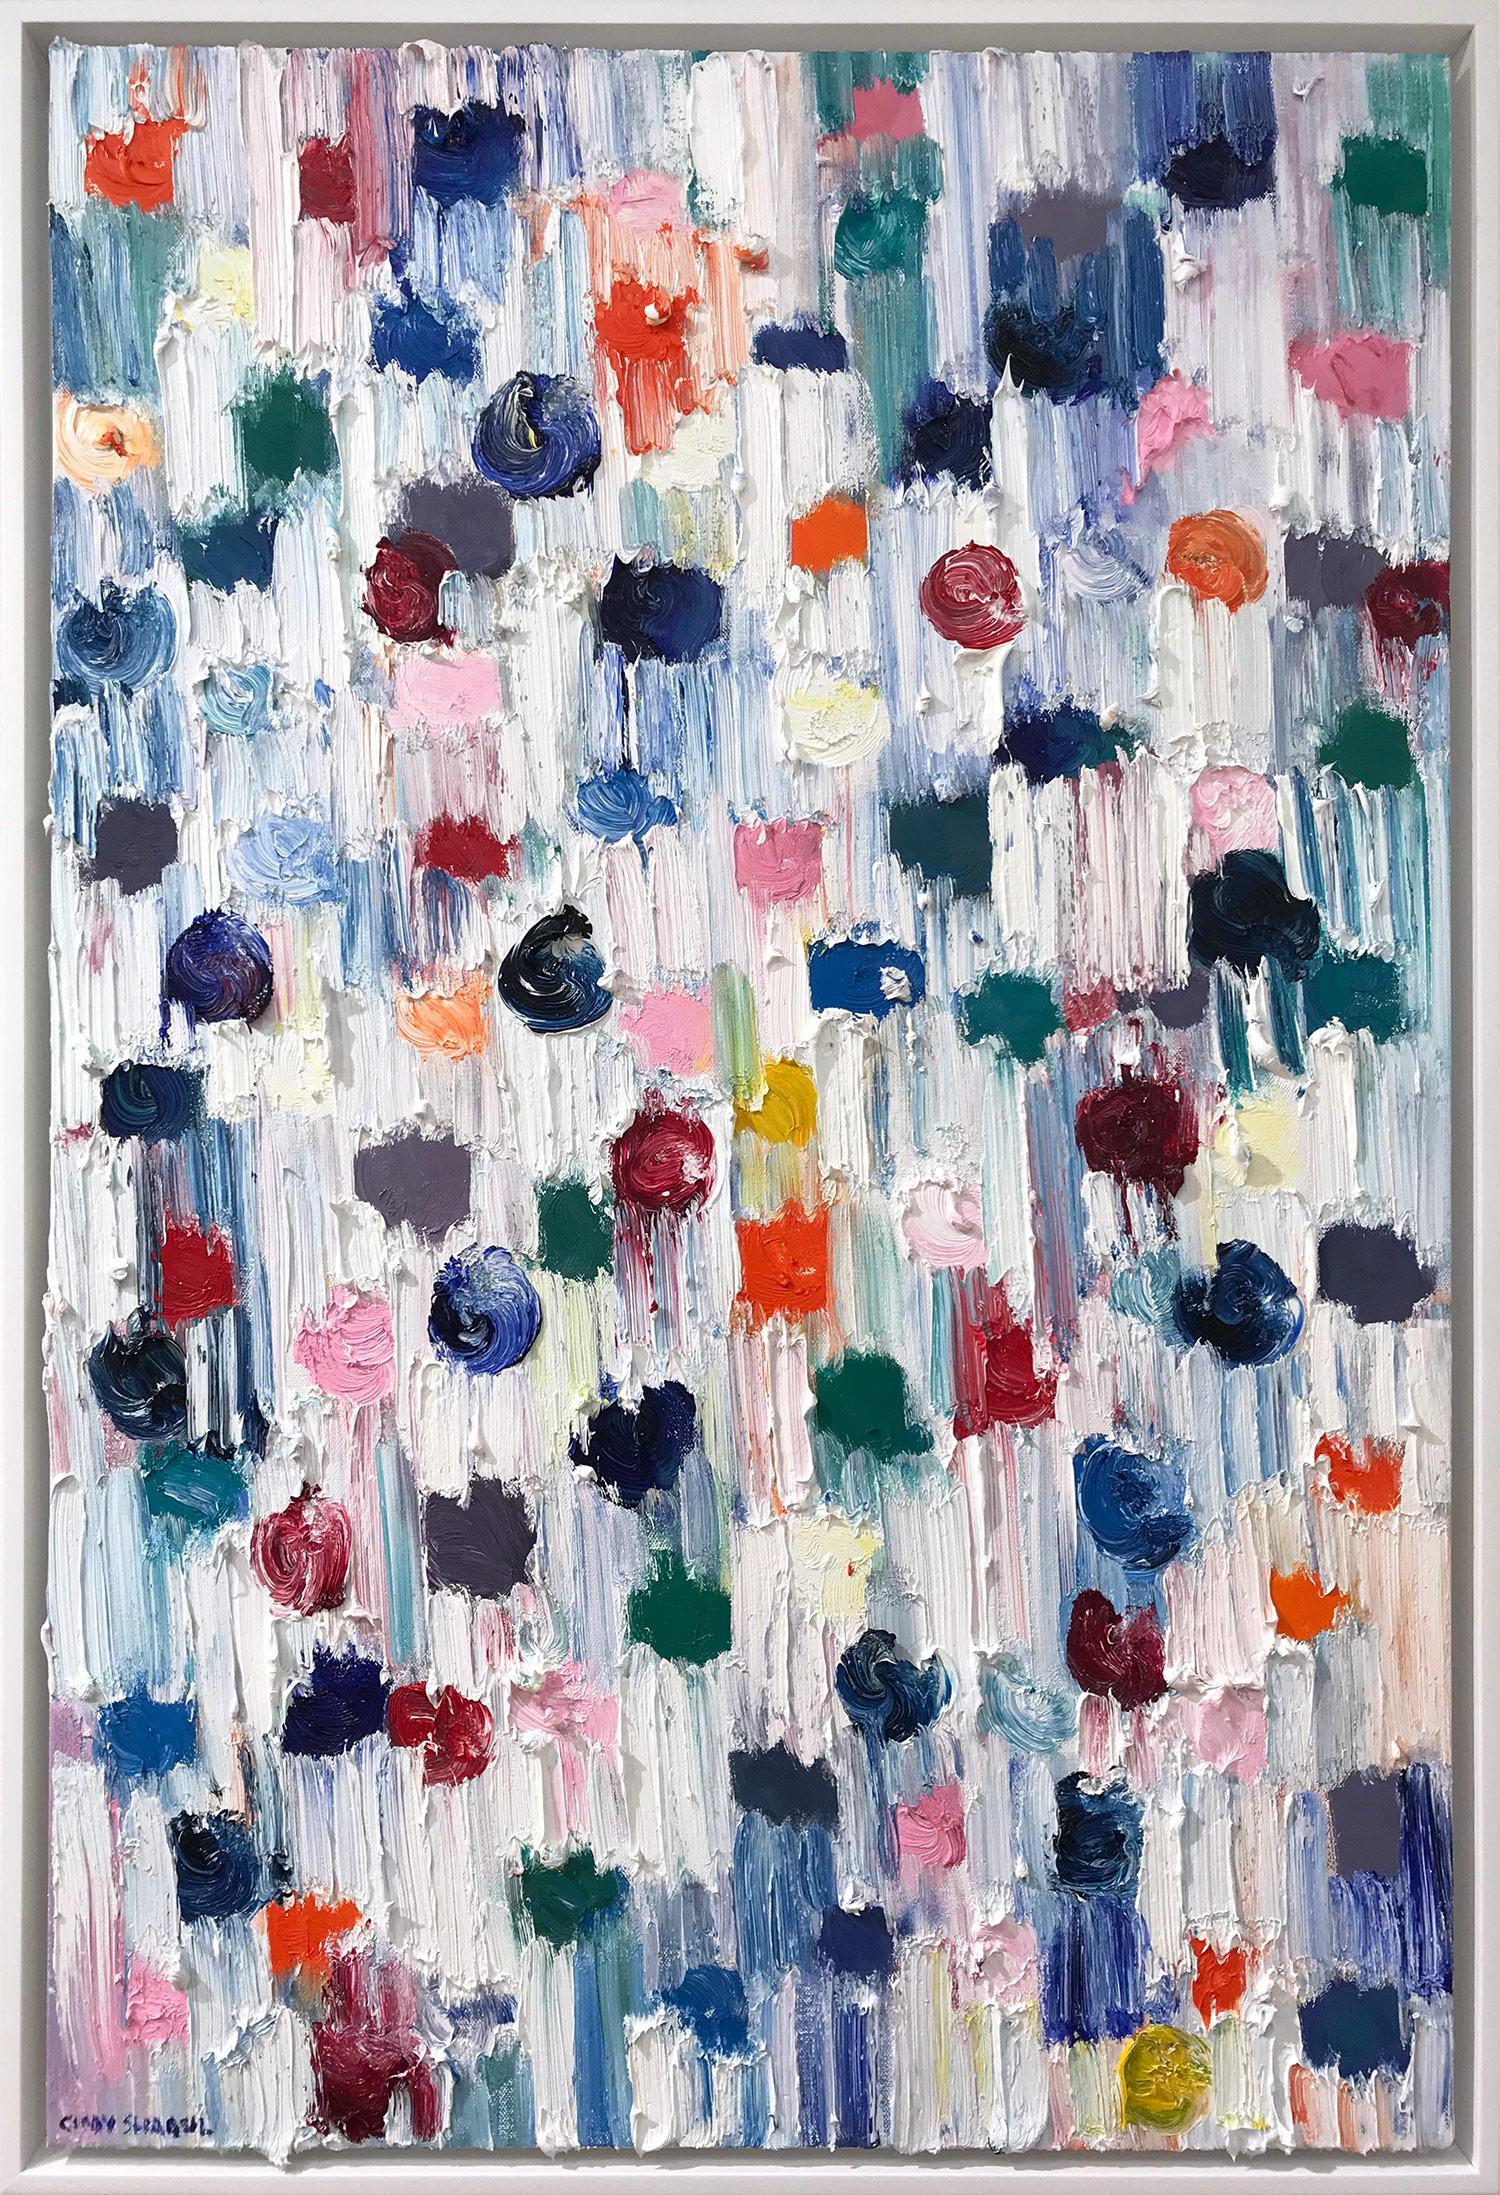 Cindy Shaoul Abstract Painting - "Dripping Dots - Marseille France" Colorful Contemporary Oil Painting on Canvas